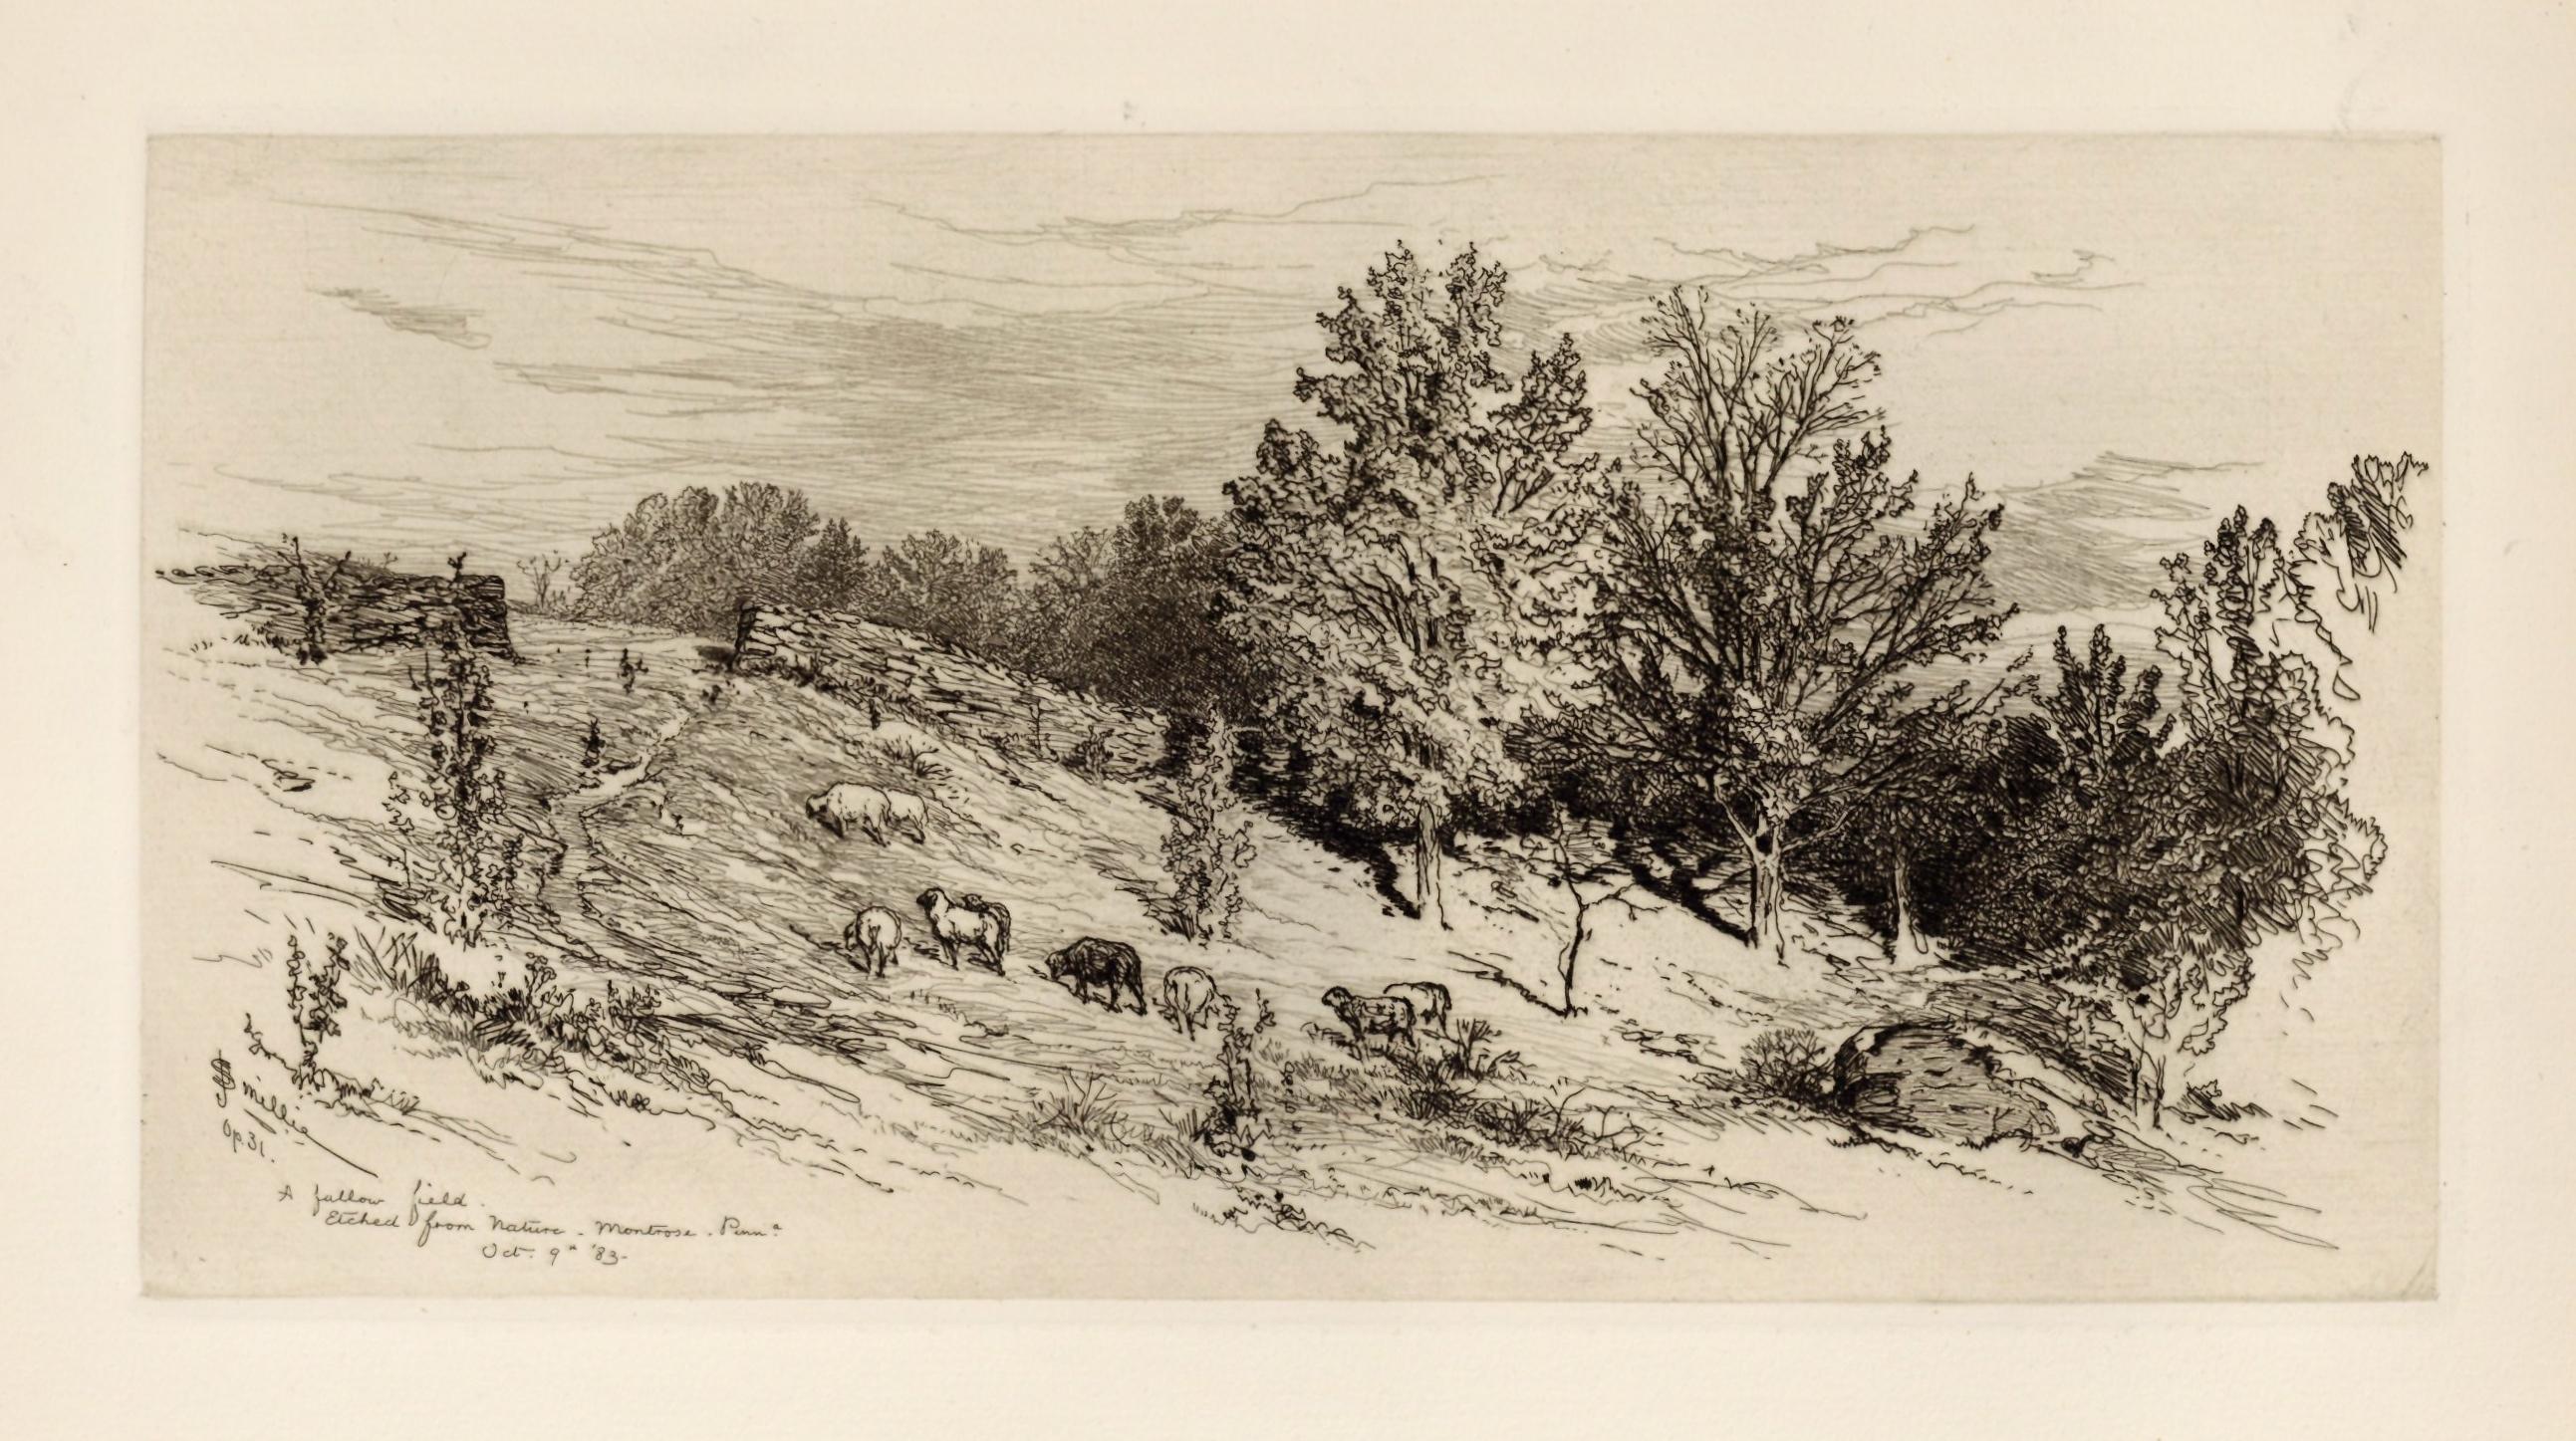 "A Fallow Field" original etching - Print by James Smillie